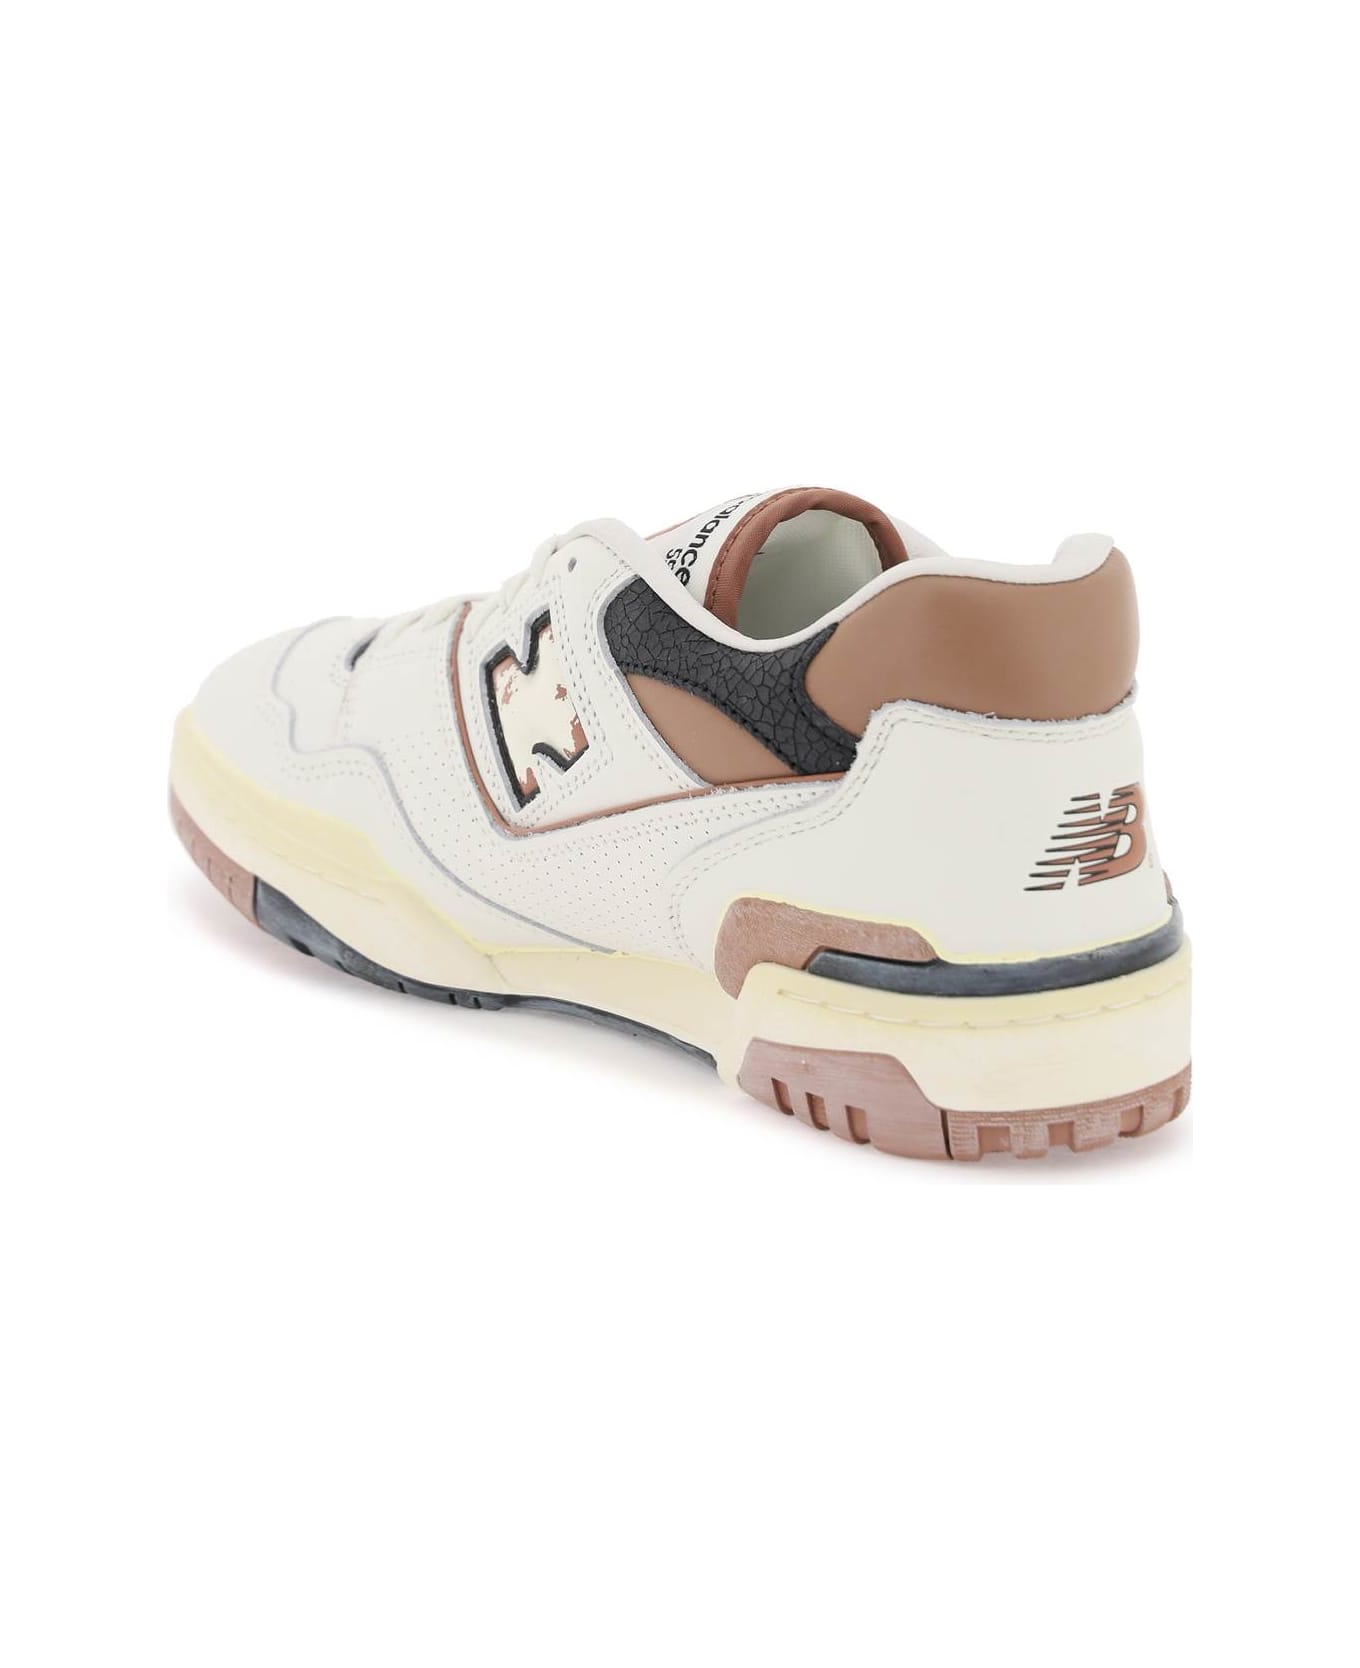 New Balance Vintage-effect 550 Sneakers - OFF WHITE BROWN (White) スニーカー